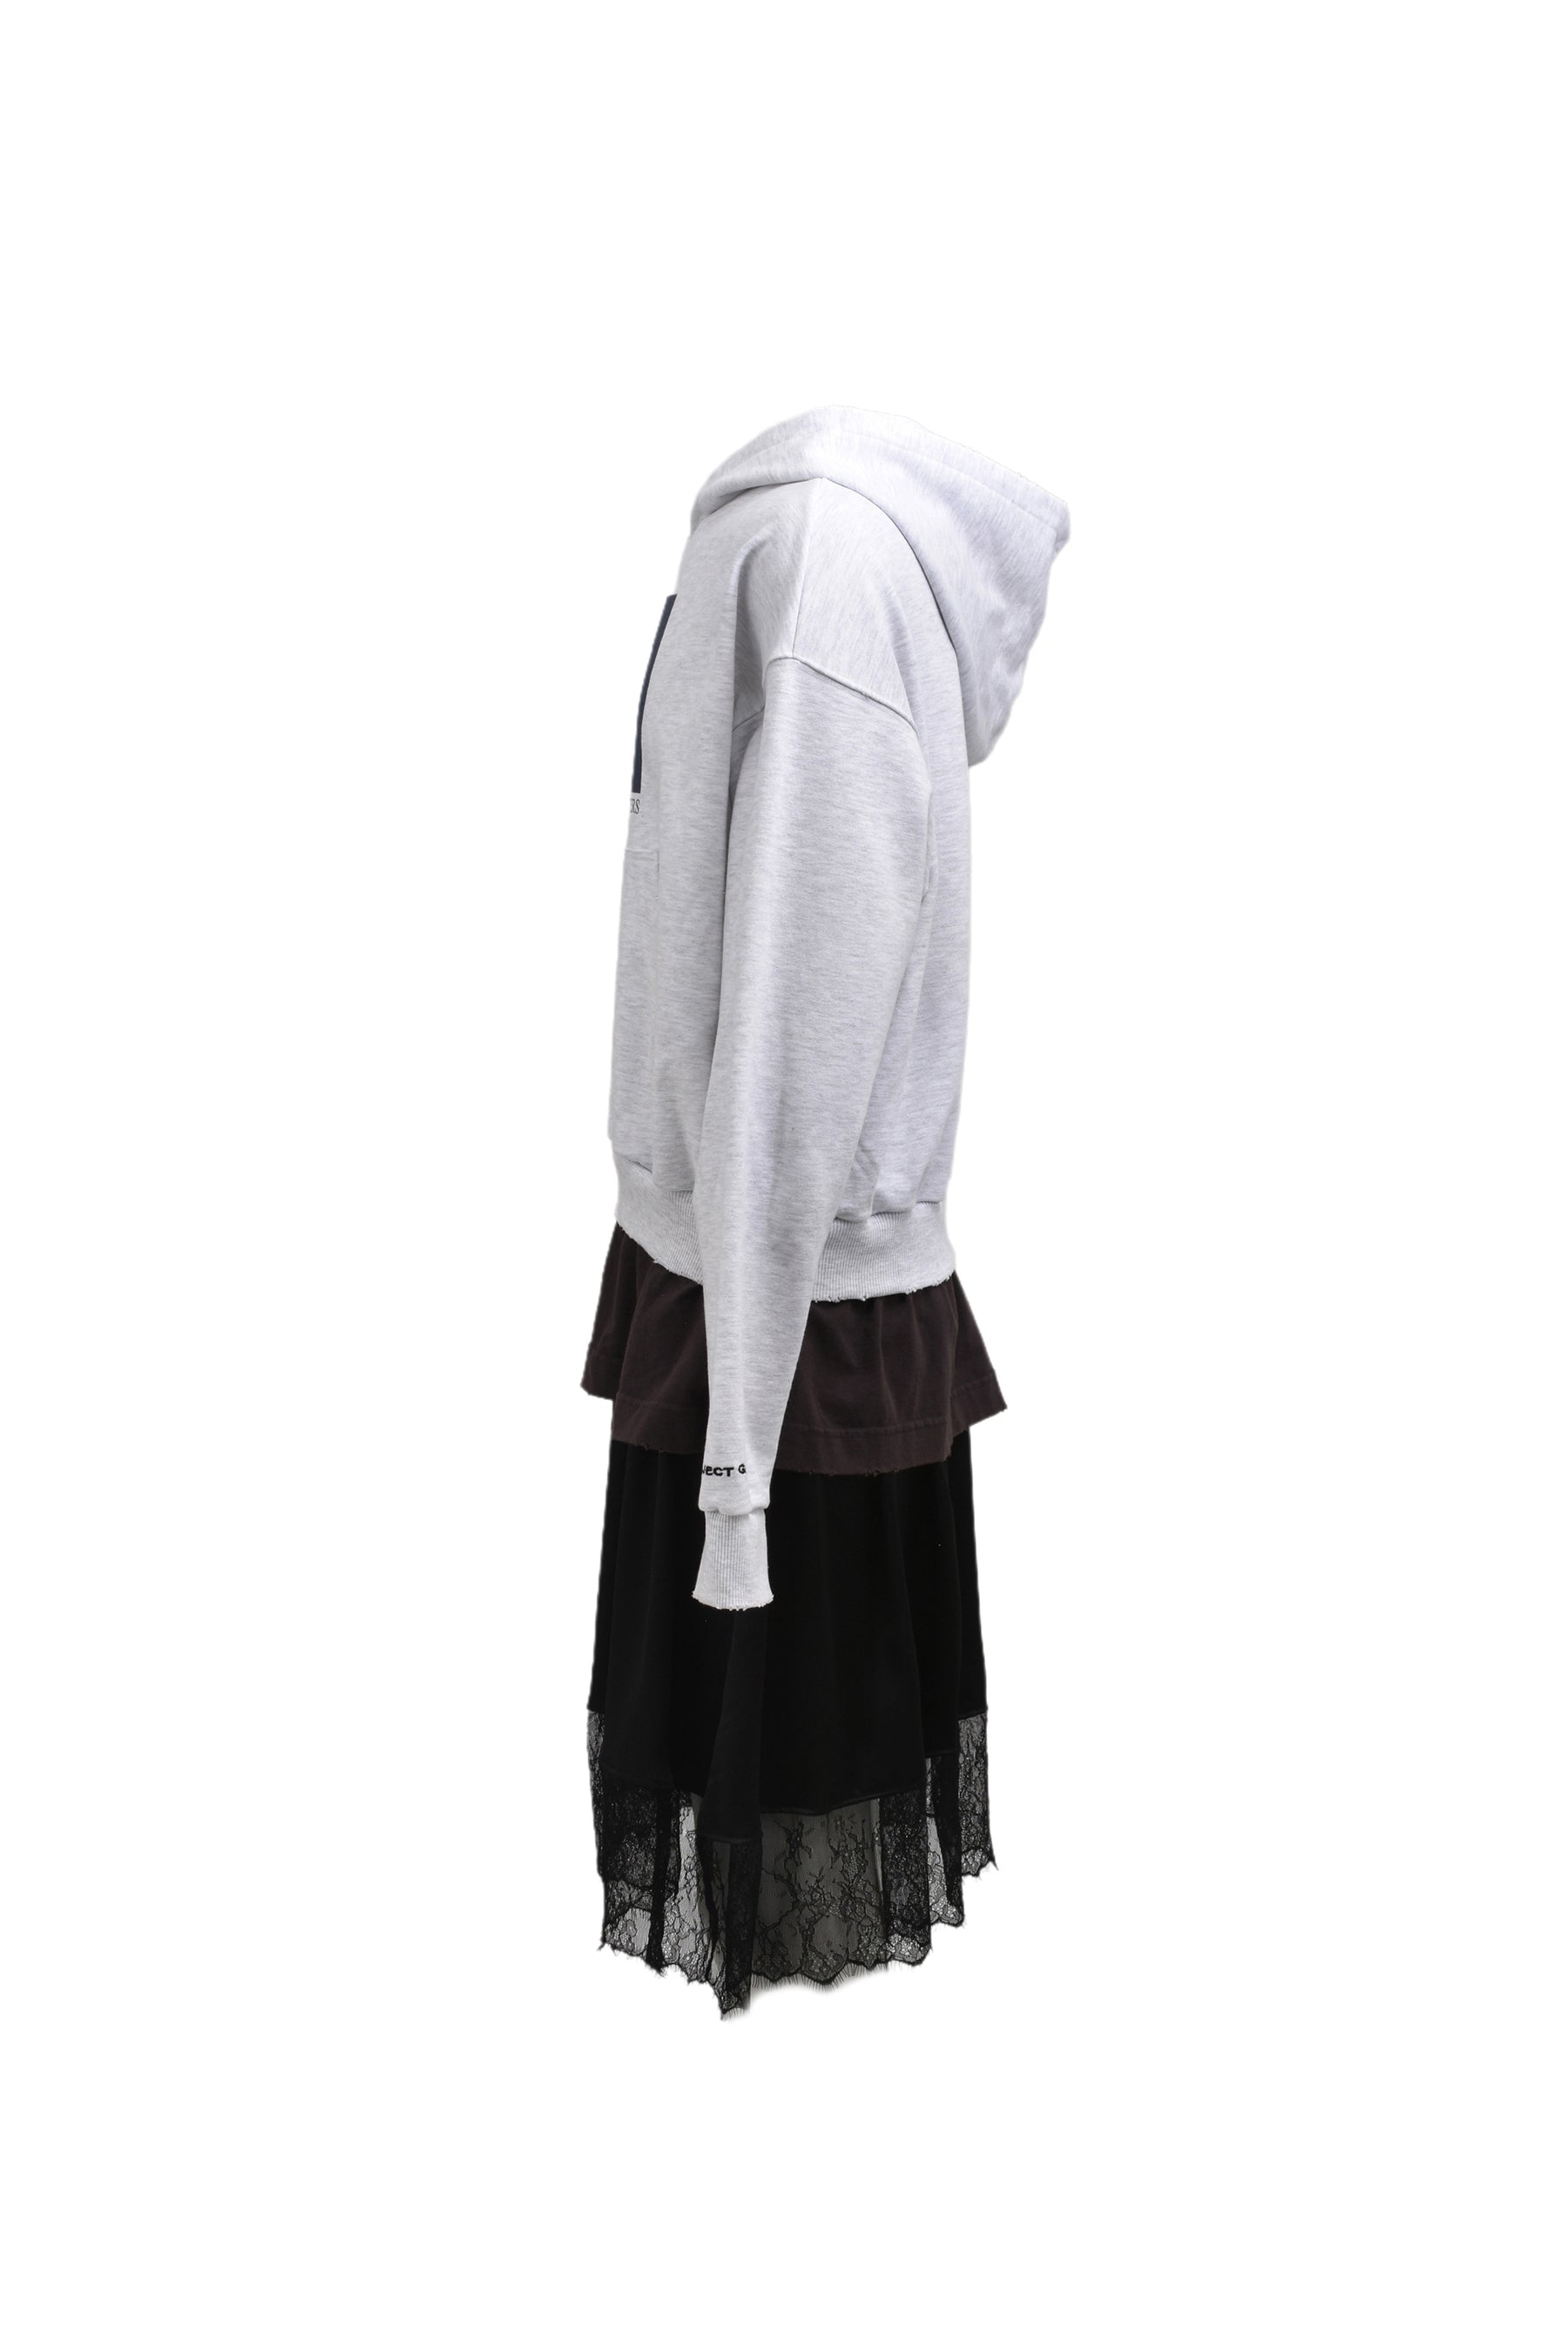 LAYERED HOODED DRESS / GRY